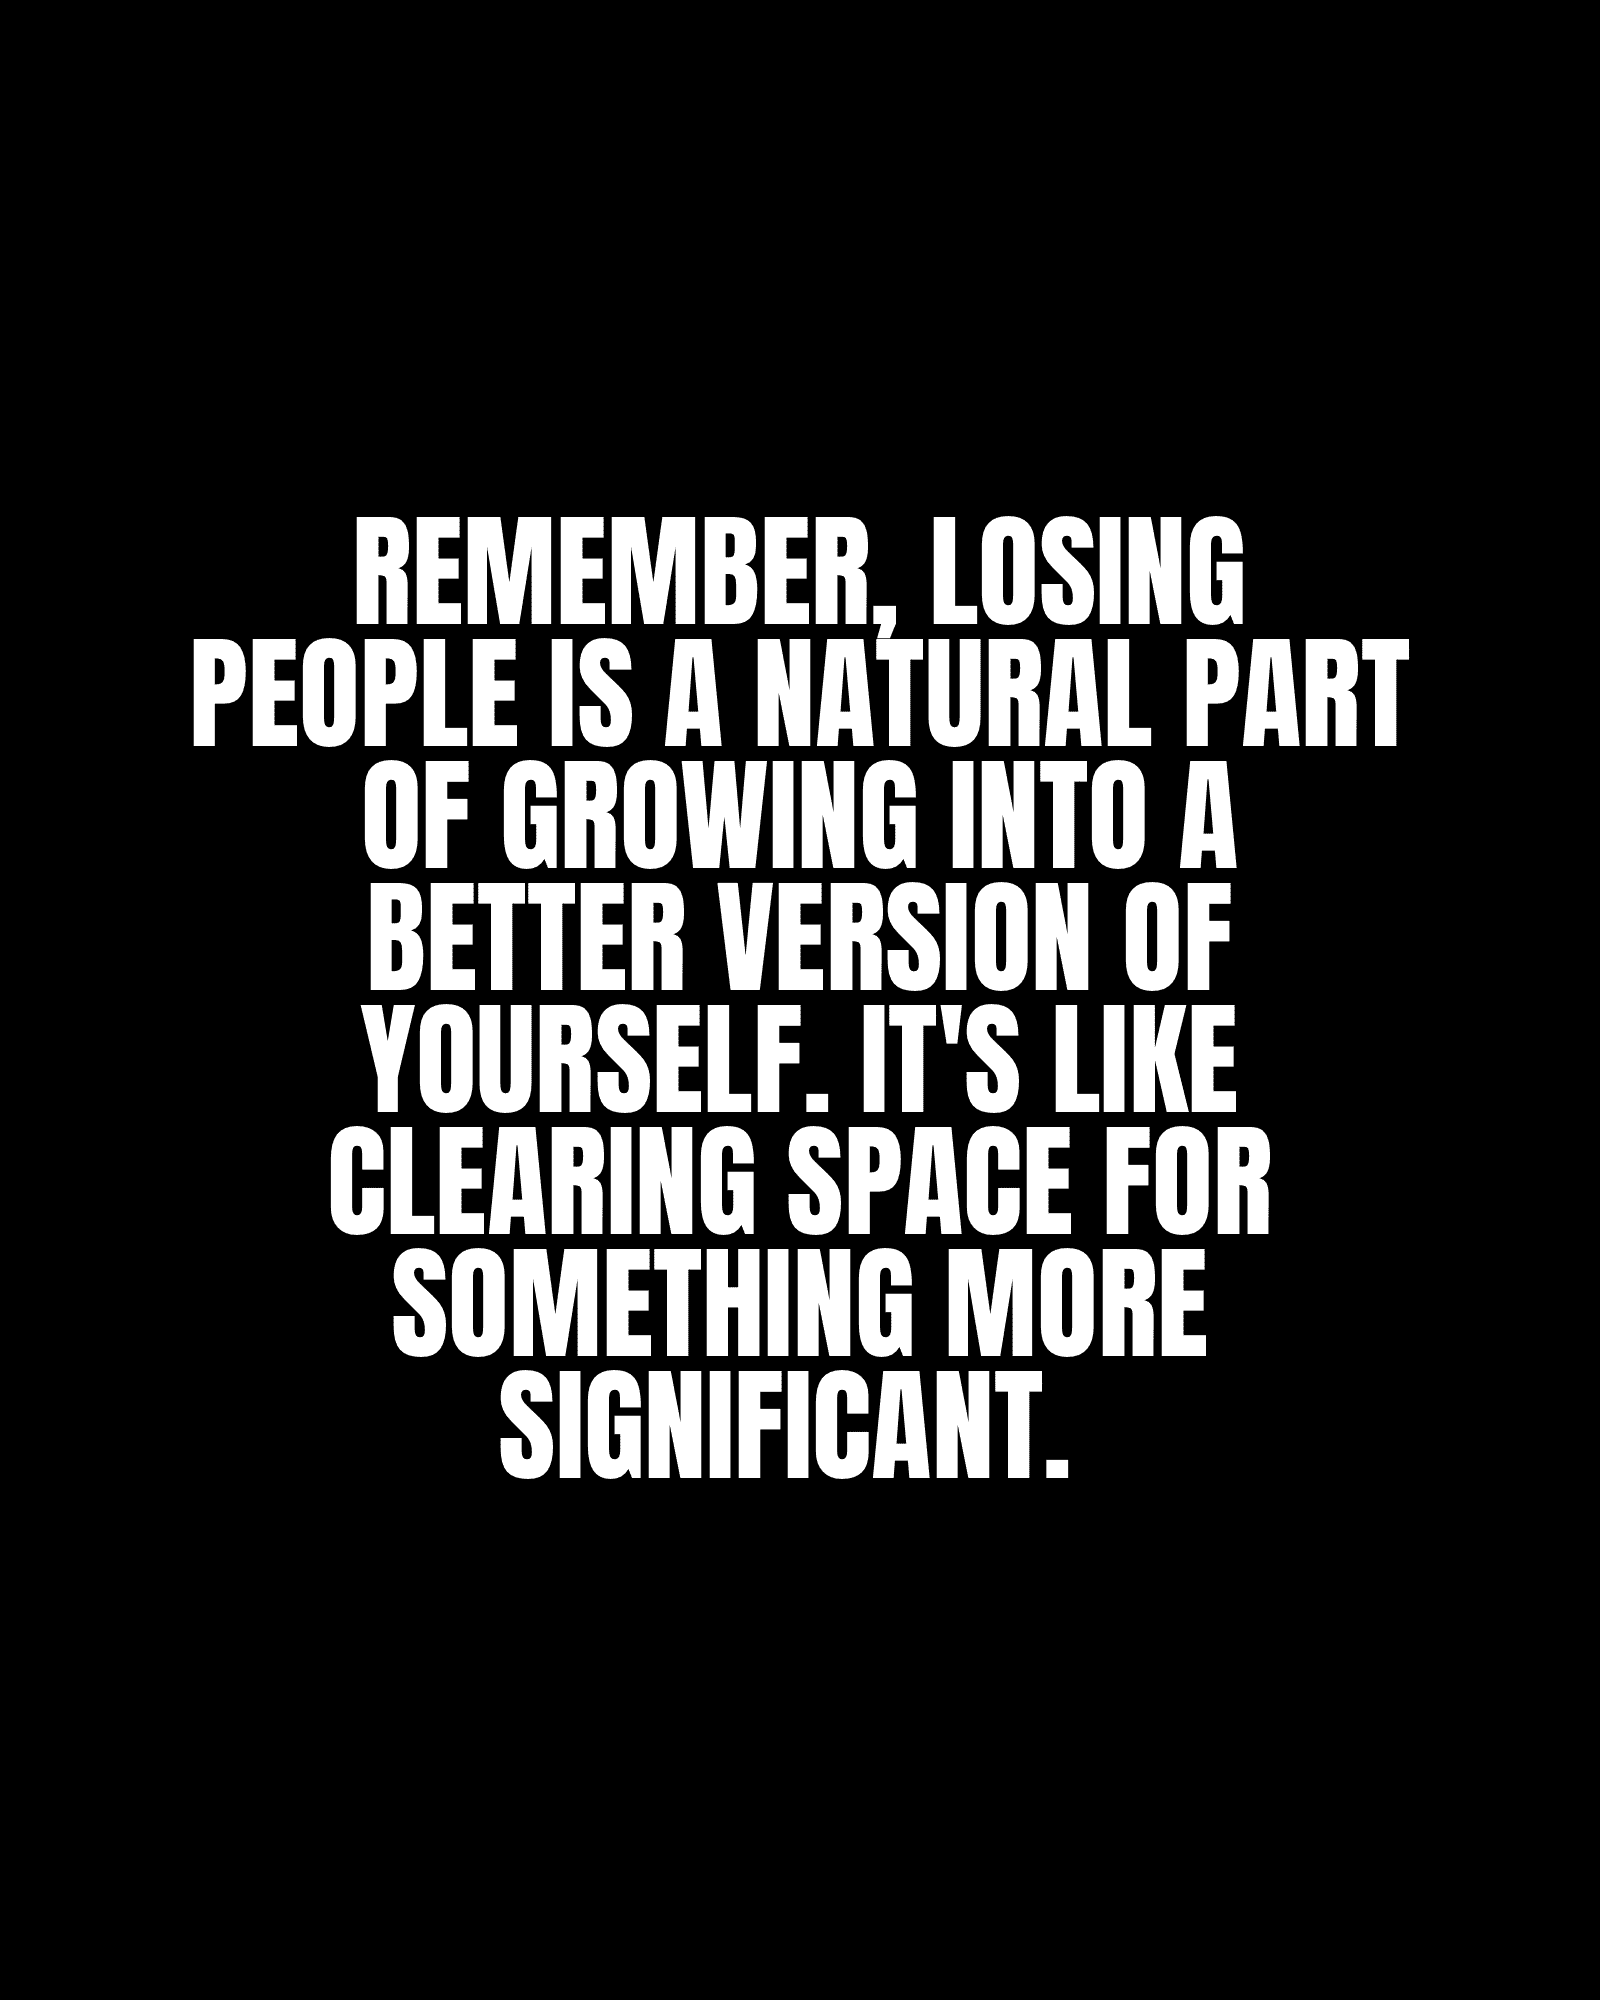 Remember, losing people is a natural part of growing into a better version of yourself. It’s like clearing space for something more significant.